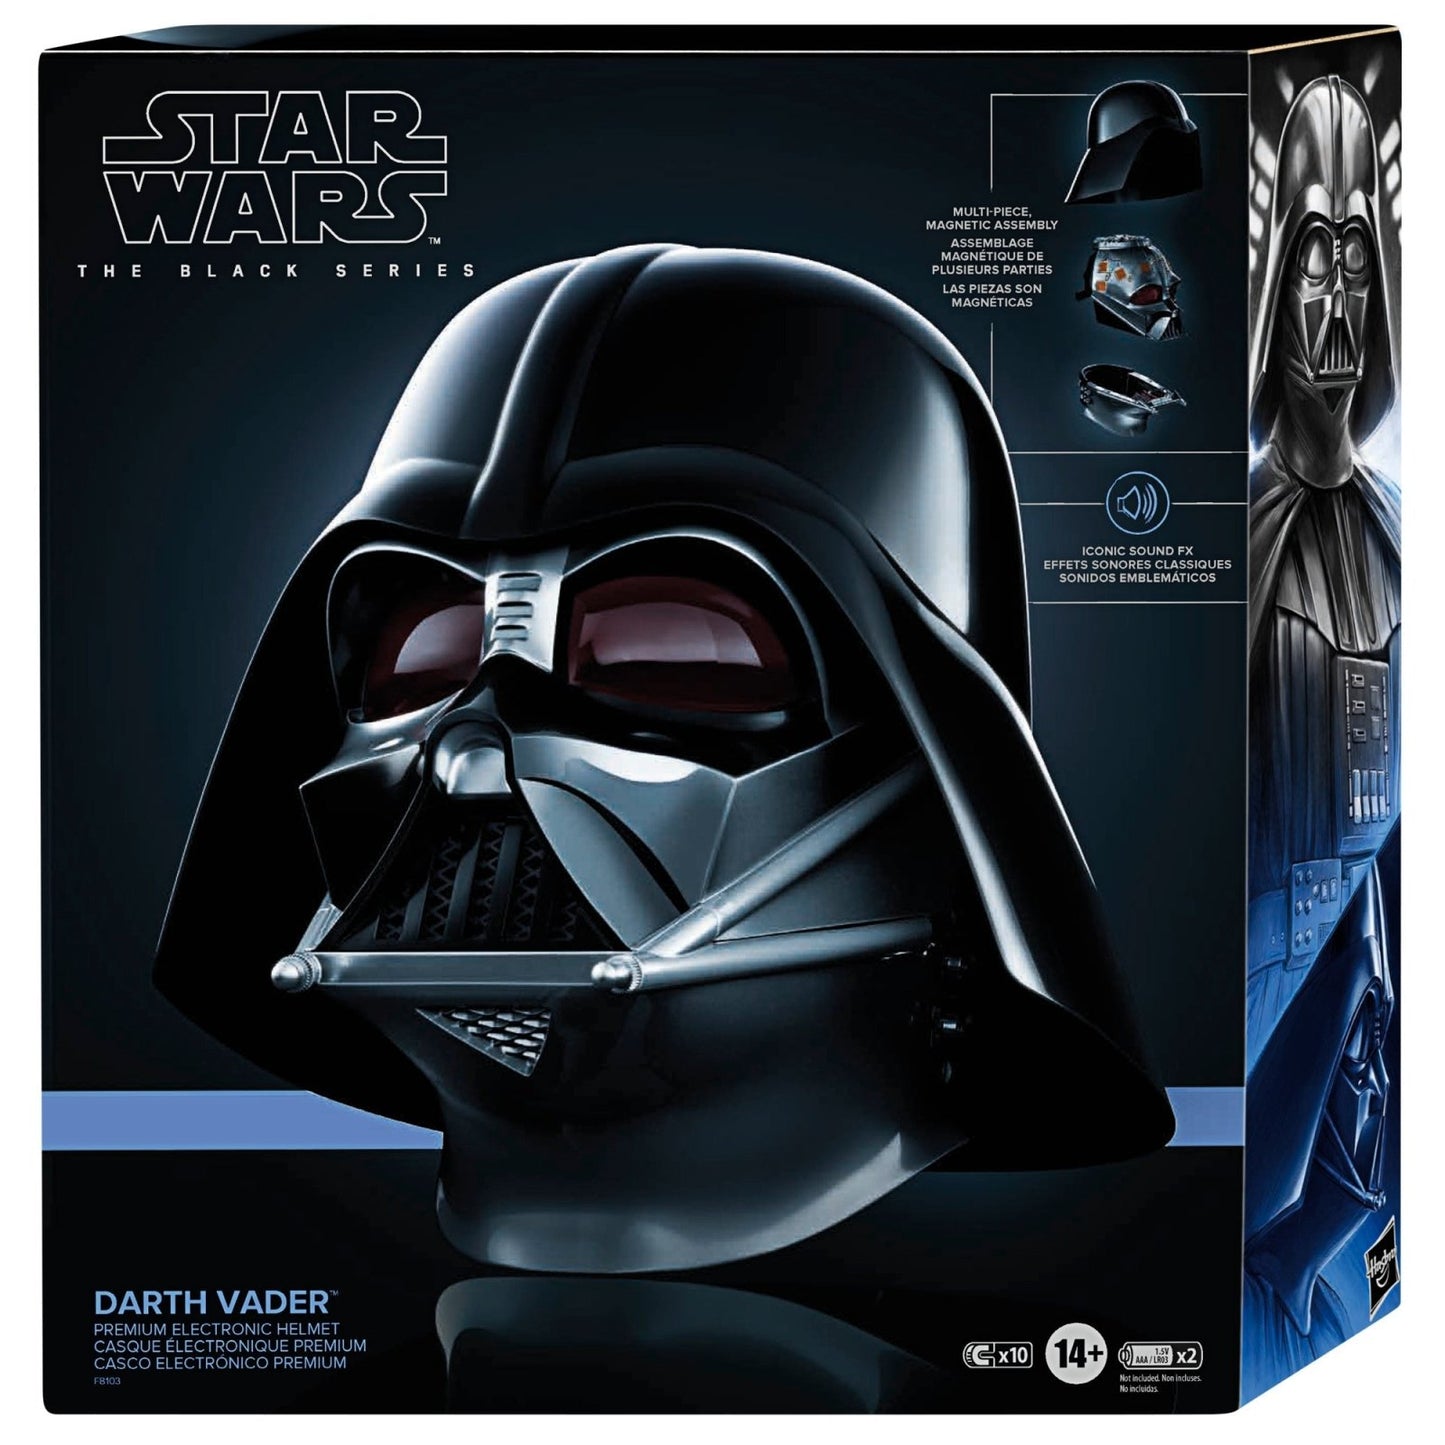 Star Wars The Black Series Darth Vader premium electronic helmet - The Fourth Place